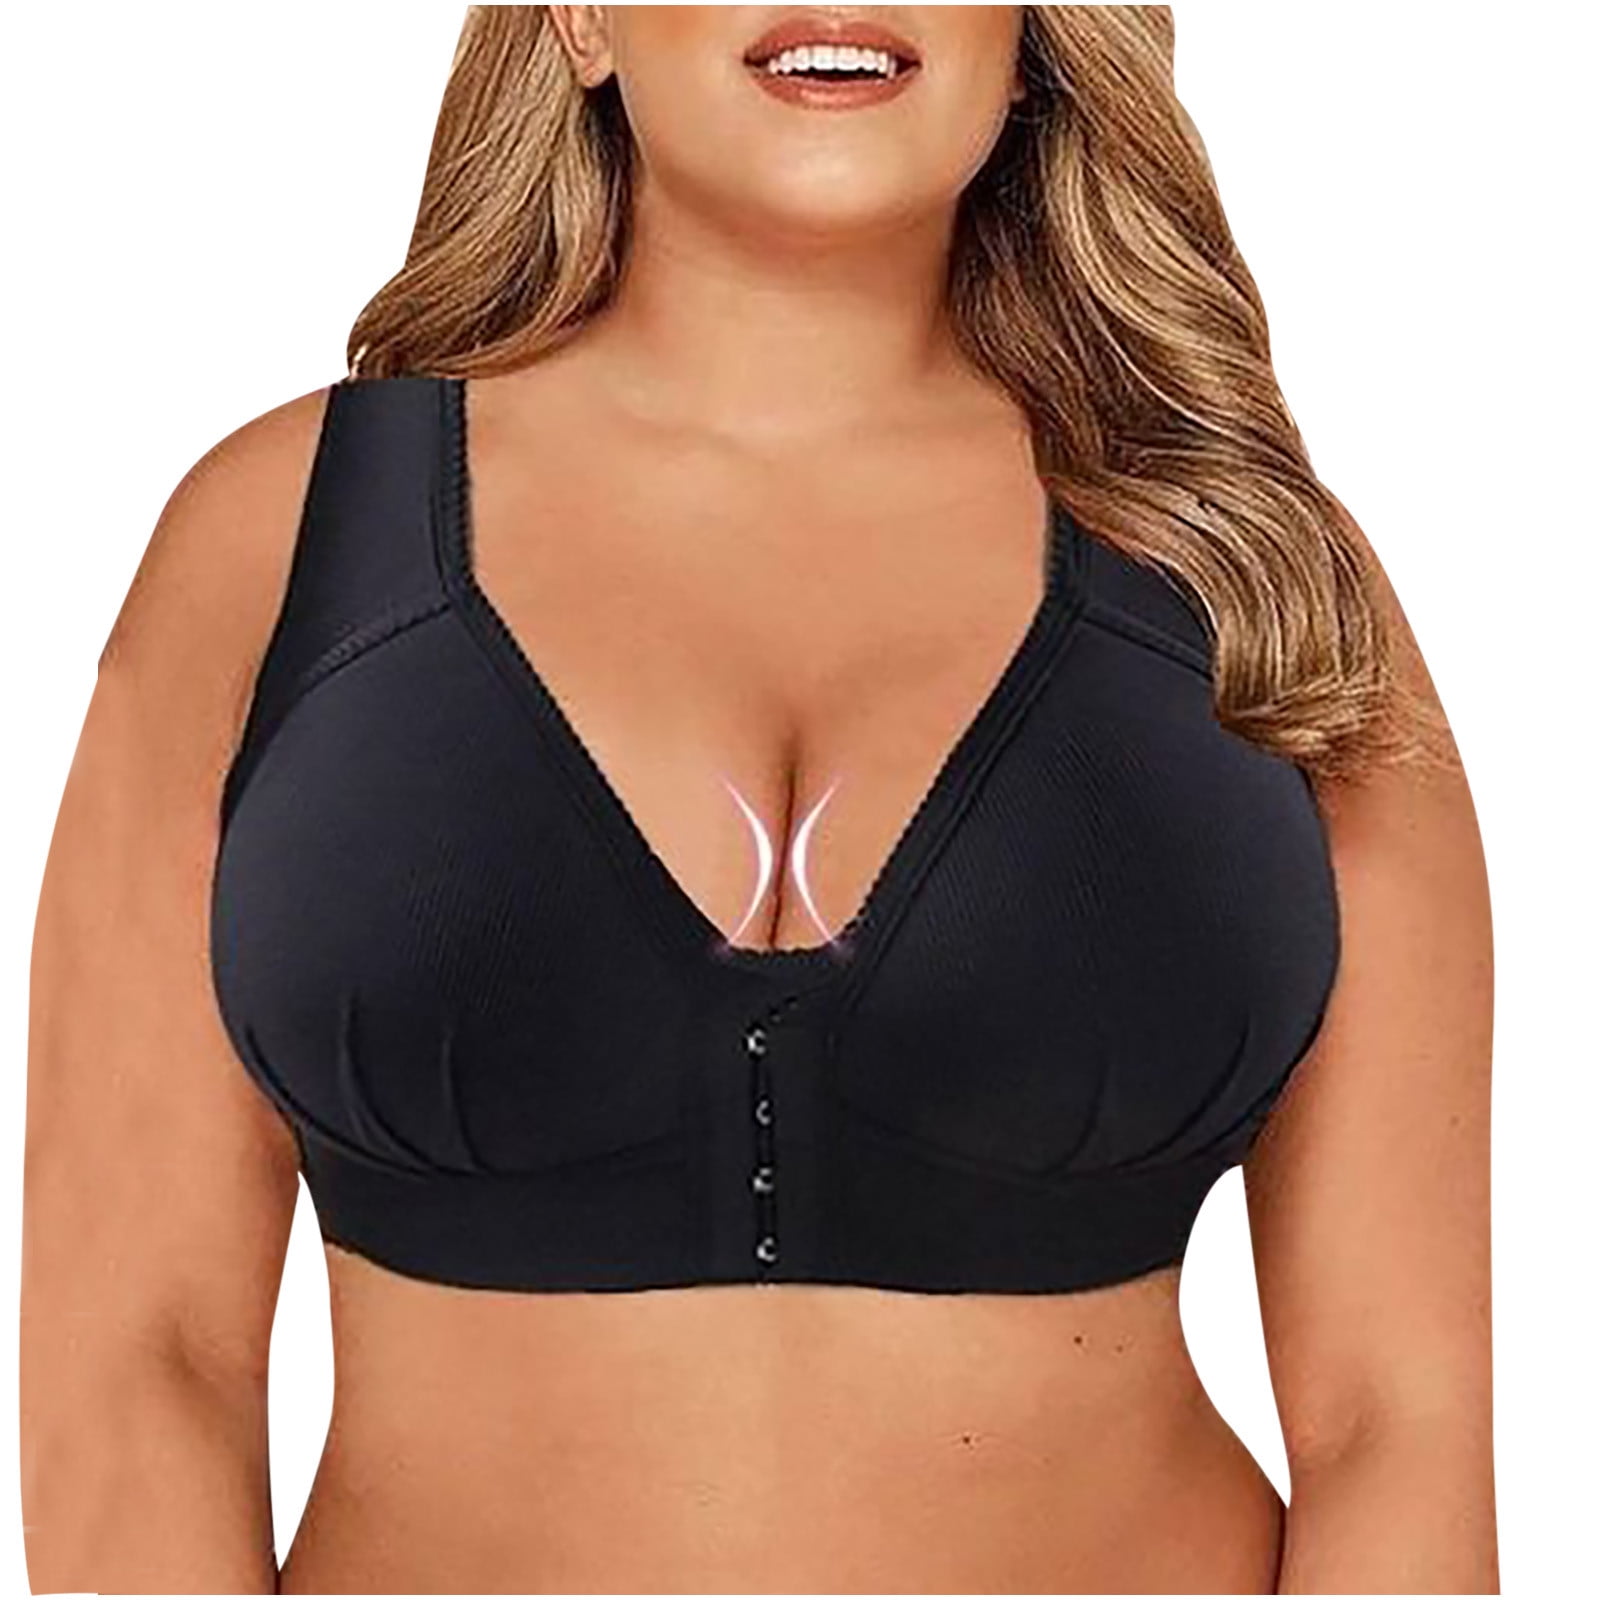 DORKASM Front Closure Bras for Women 36dd Clearance Breathable Padded High  Support Plus Size Womens Bras Black XL